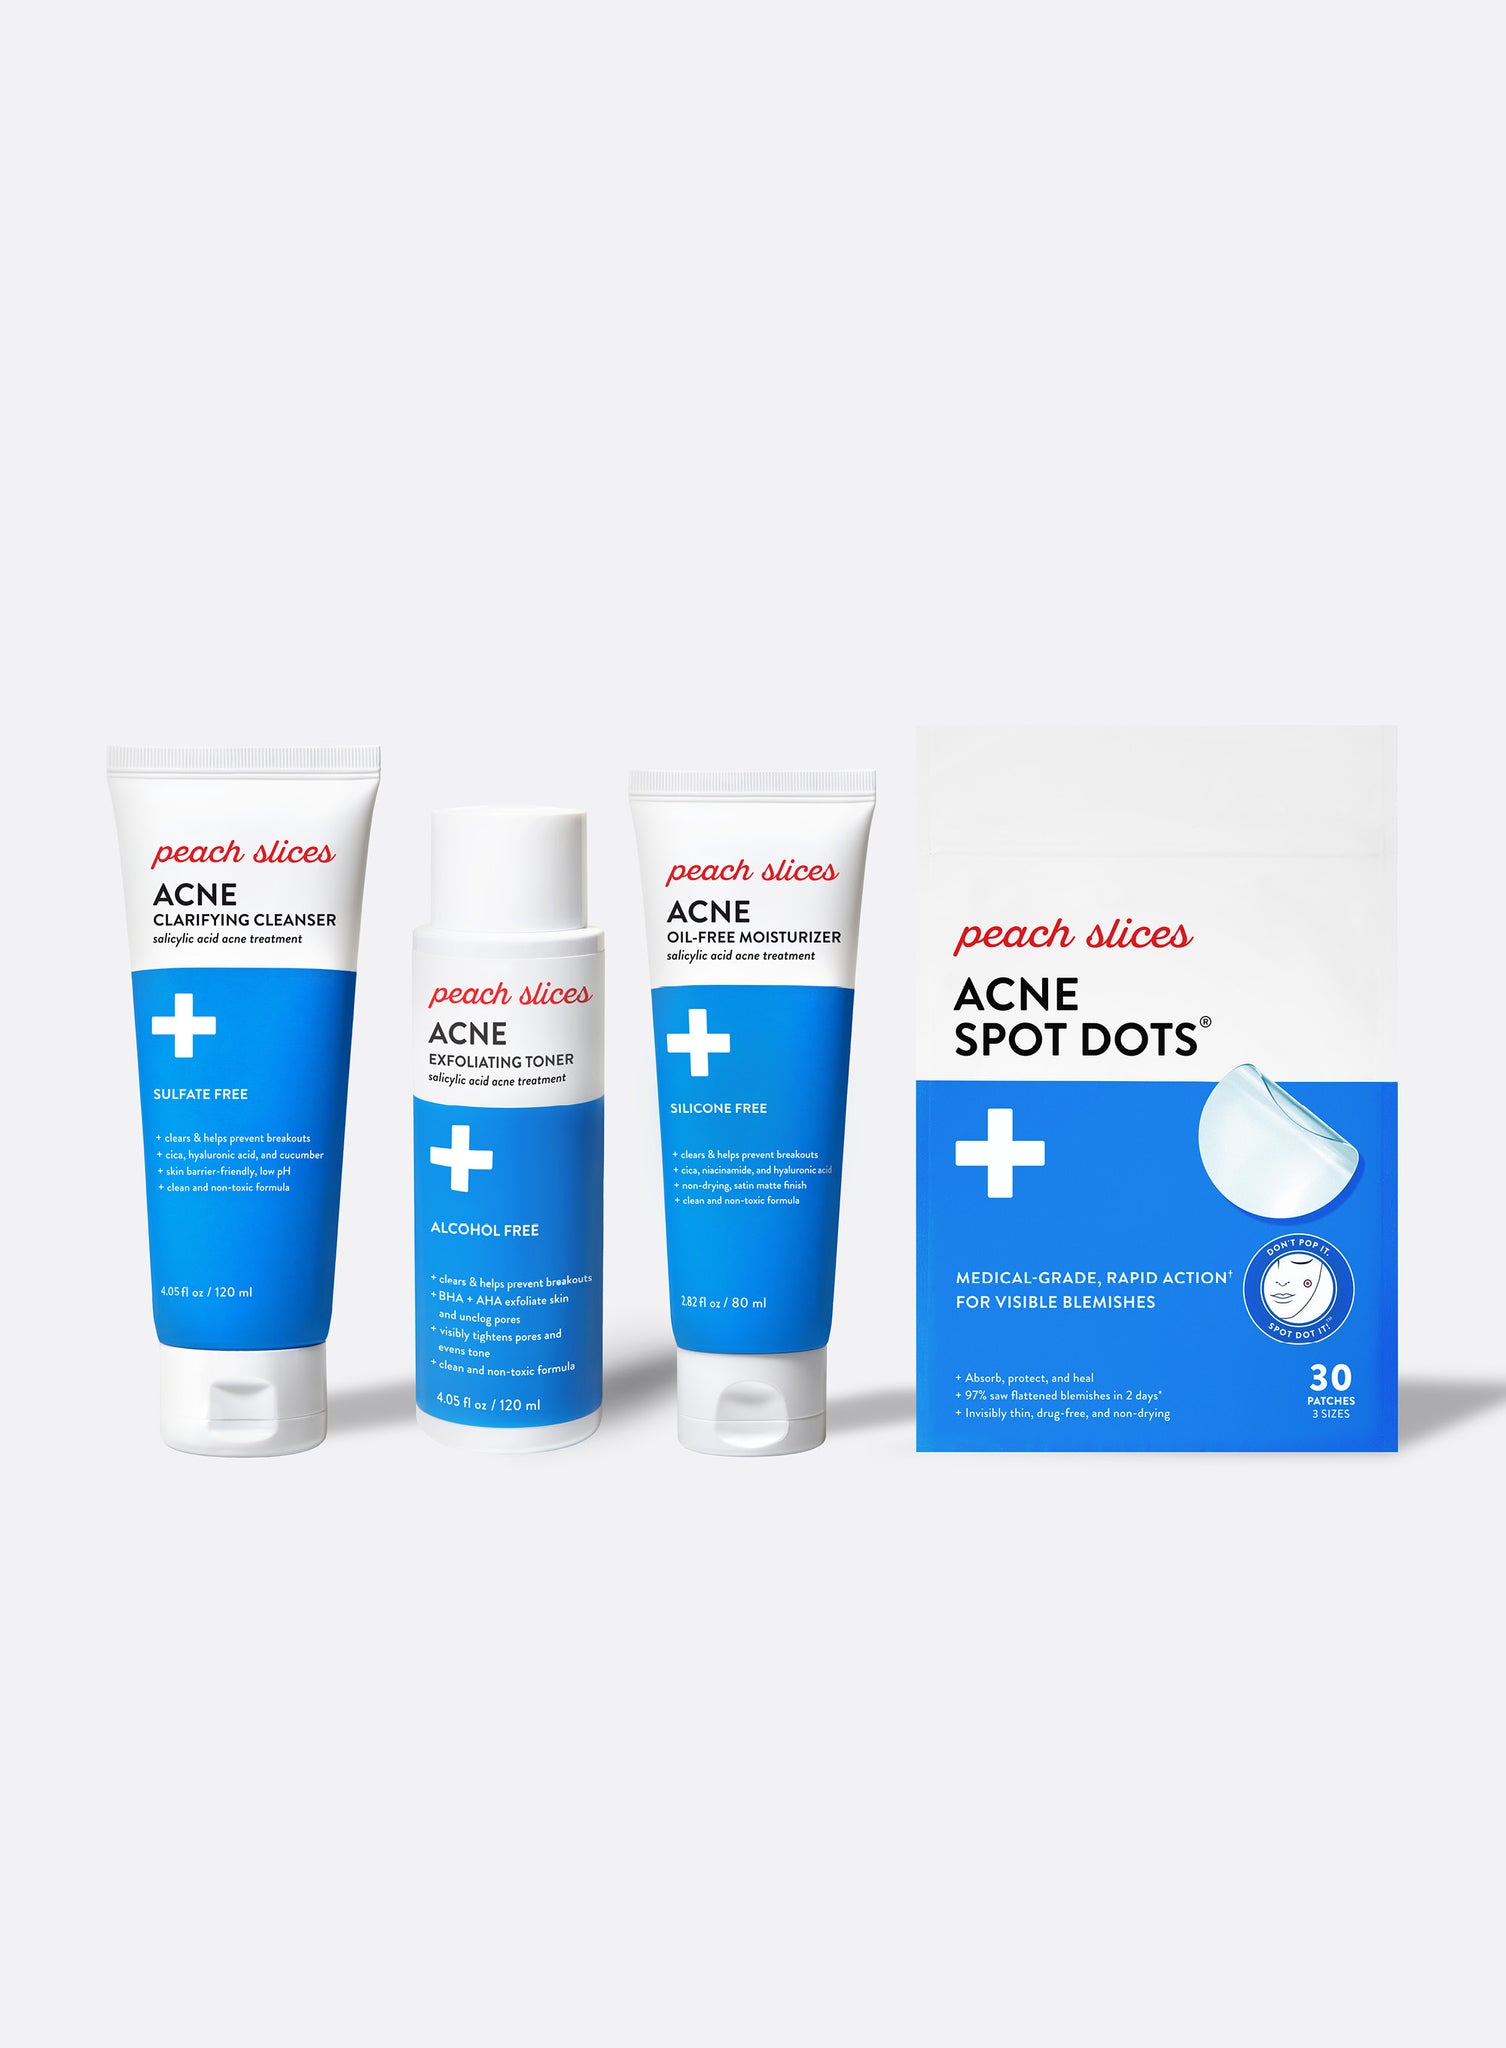 A lineup of the Peach Slices Acne System including the Acne Clarifying Cleanser, Acne Exfoliating Toner, Acne Oil-Free Moisturizer, and Acne Spot Dots